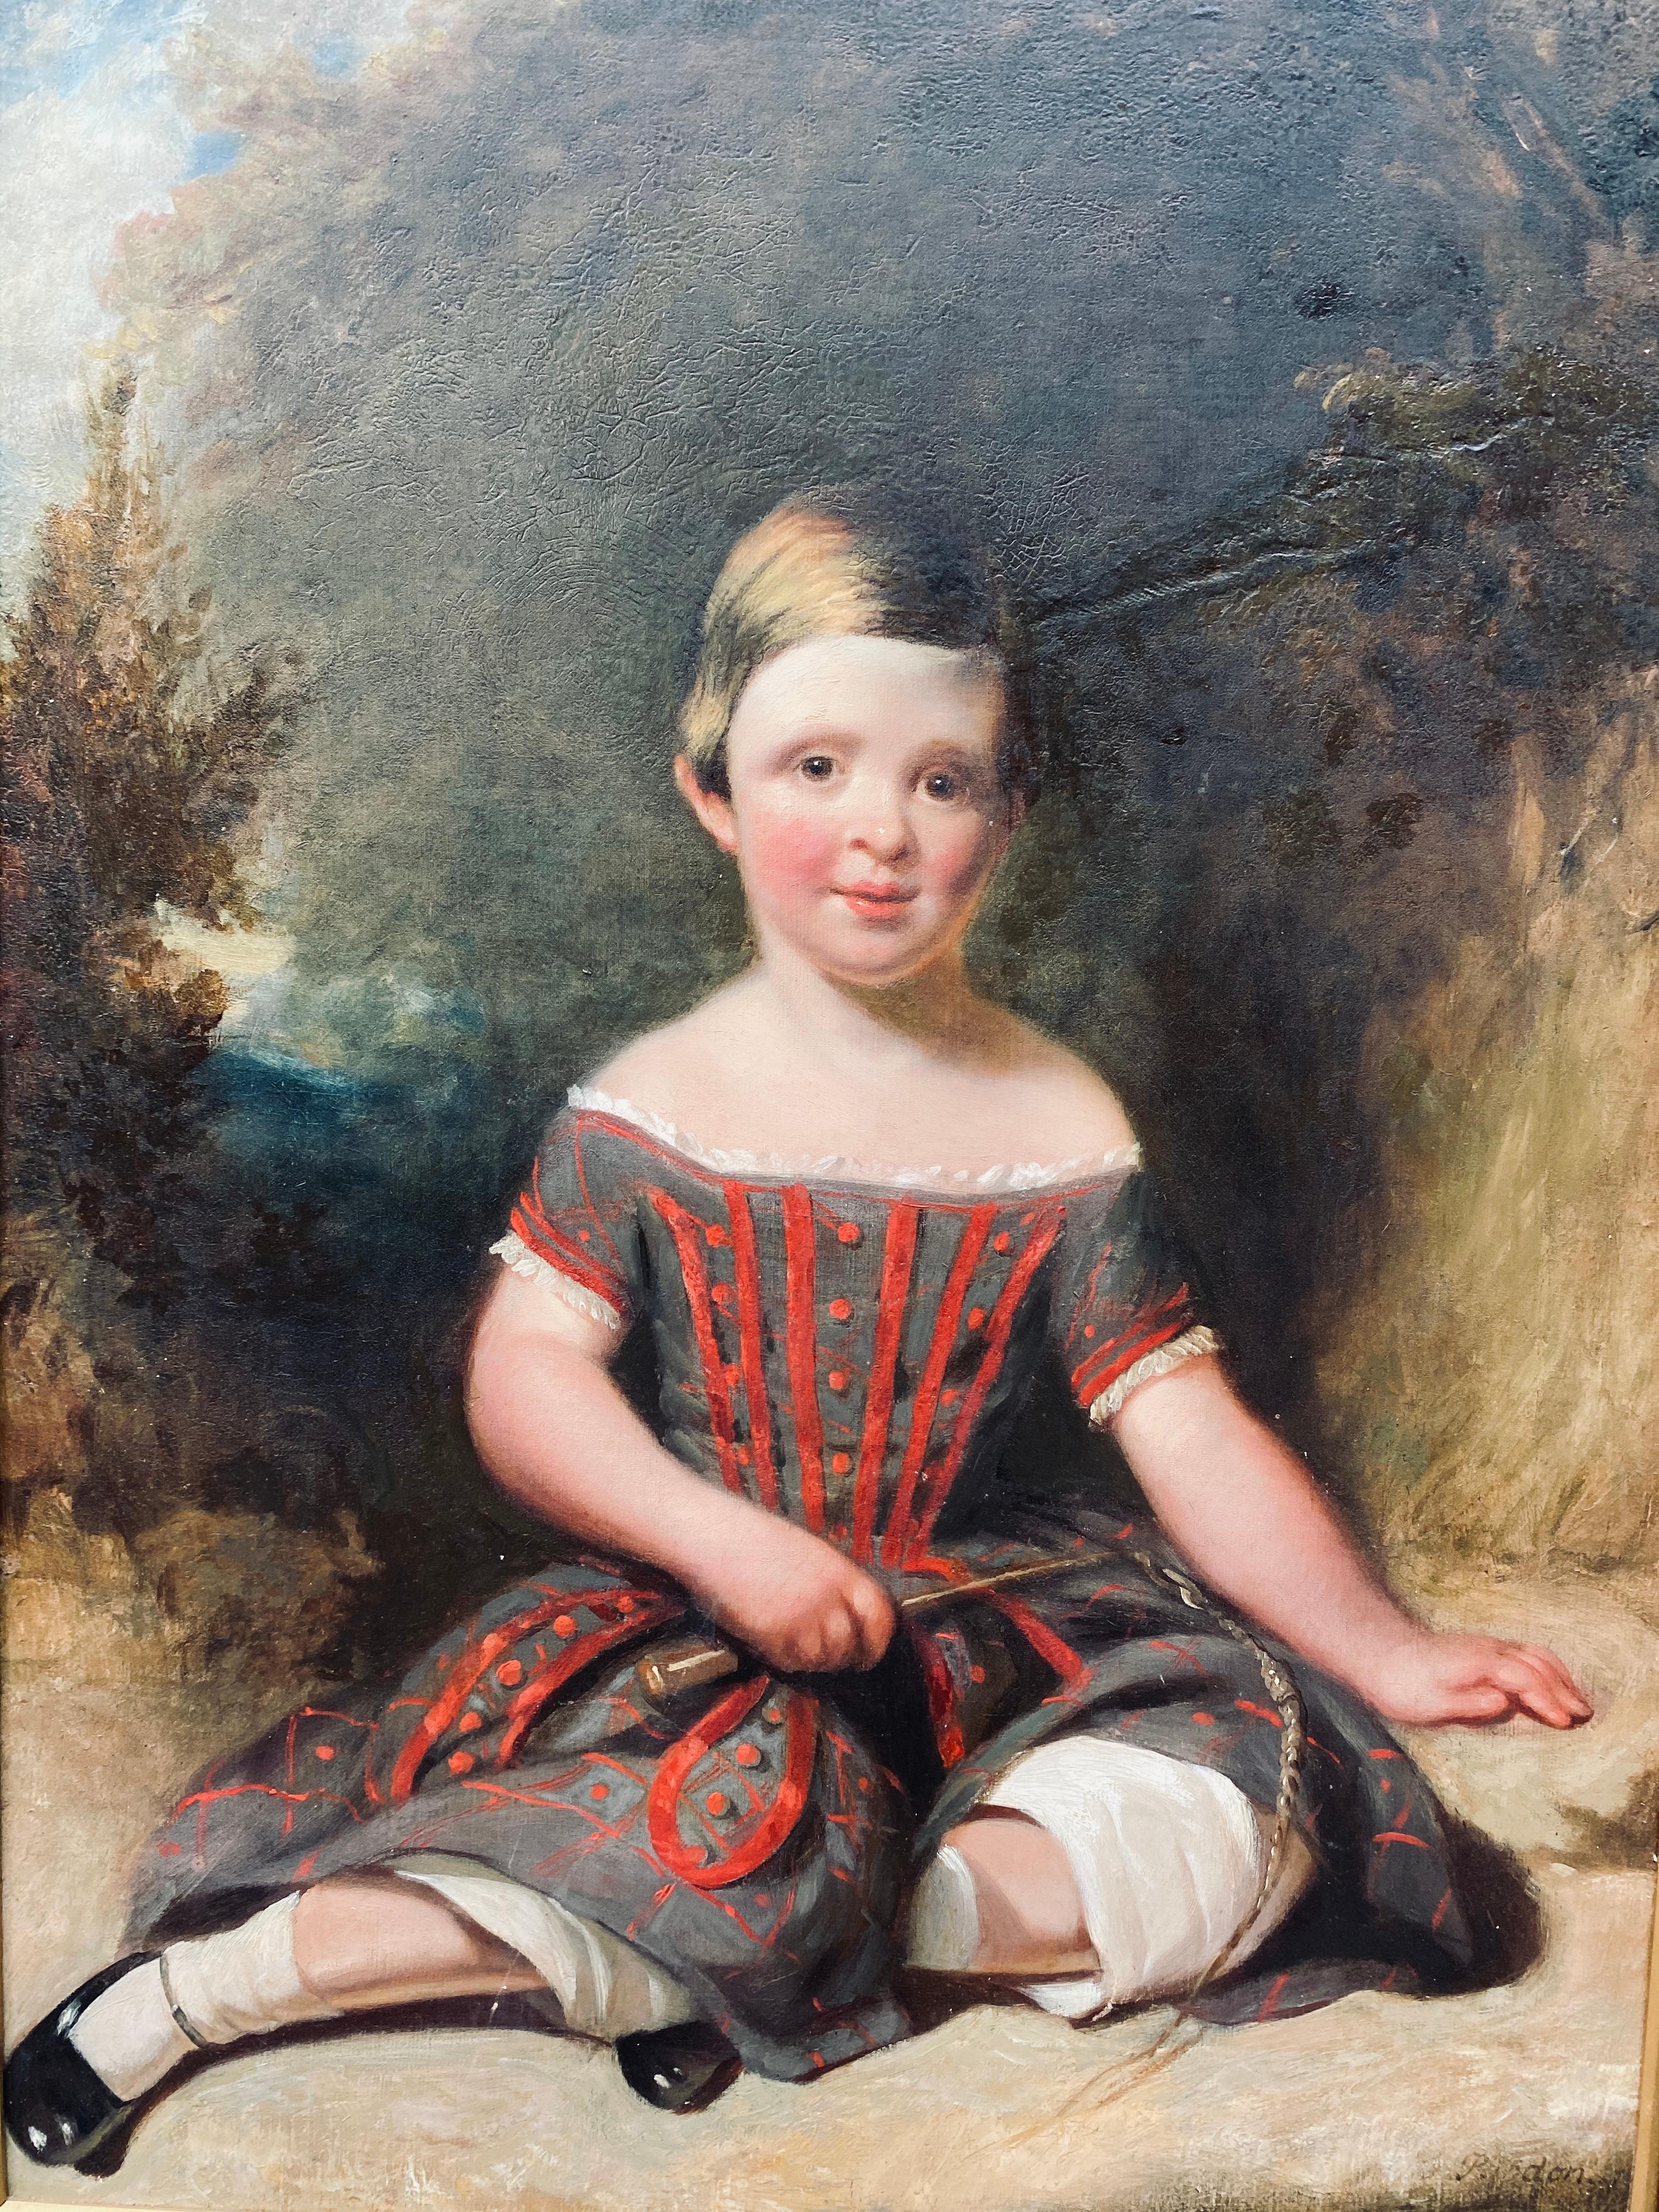 19th century English Folk Art Portrait of Young Girl in Red - Painting by James Pardon